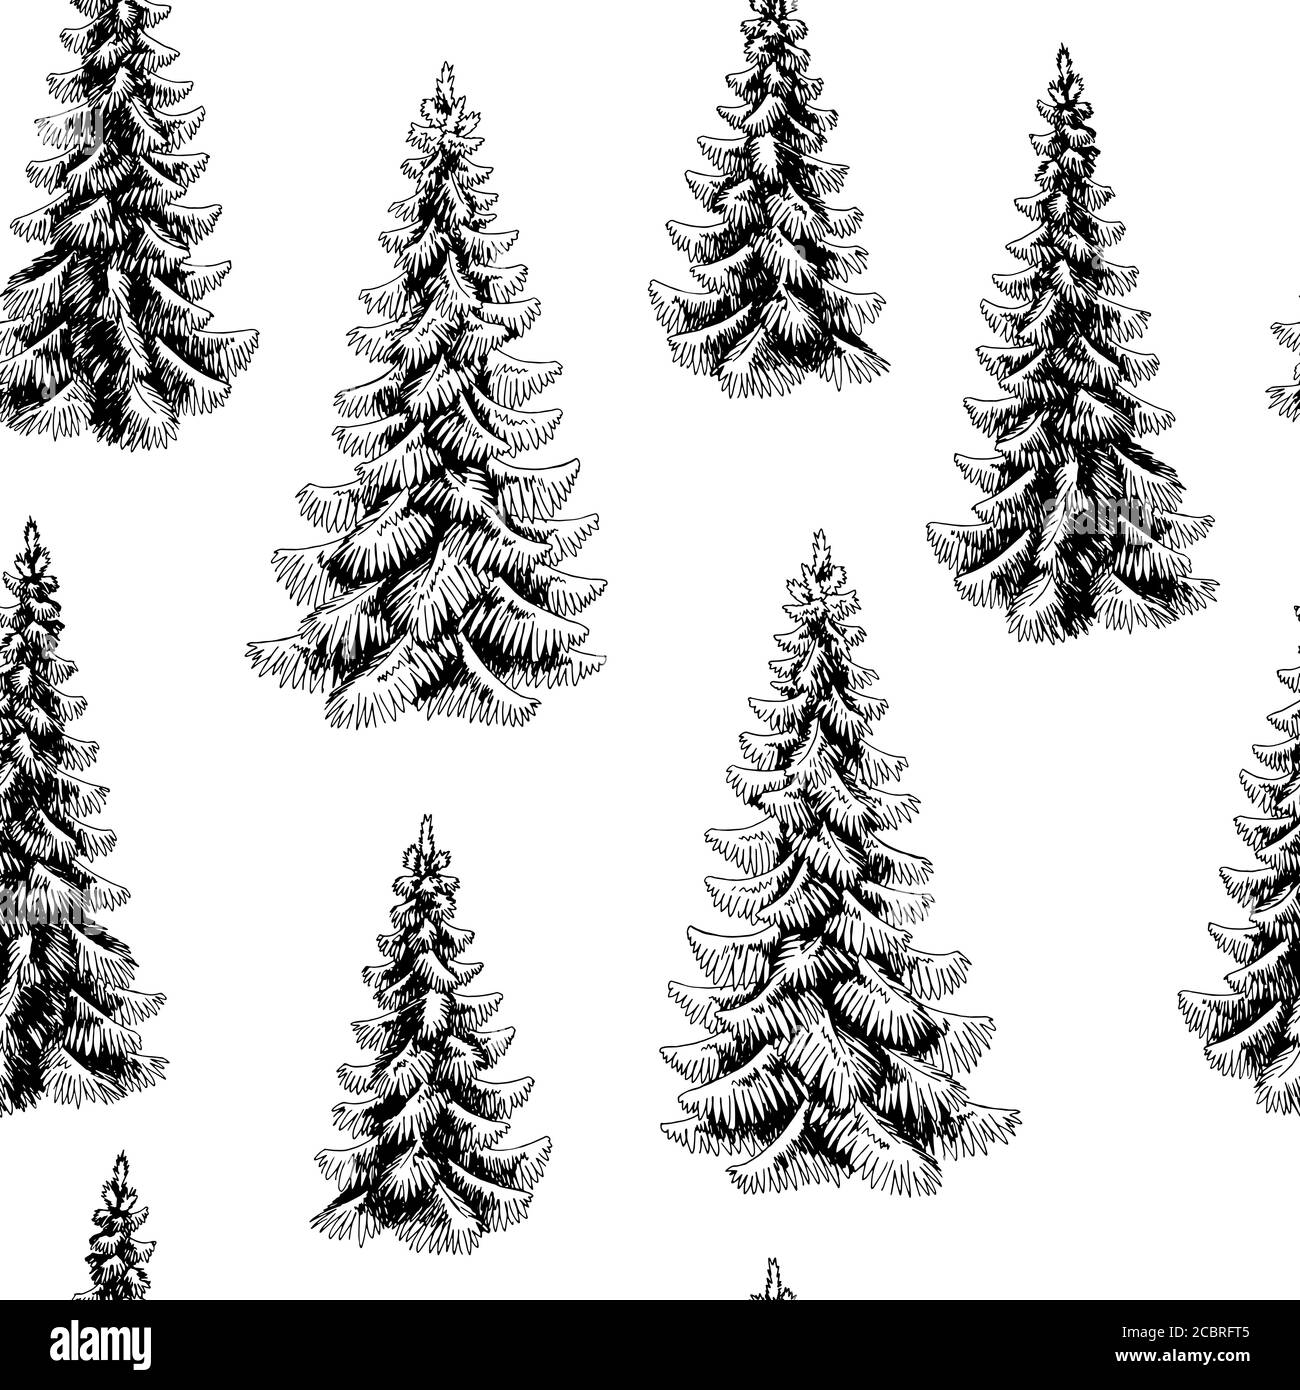 Fir tree spruce graphic black white seamless pattern background sketch illustration vector Stock Vector